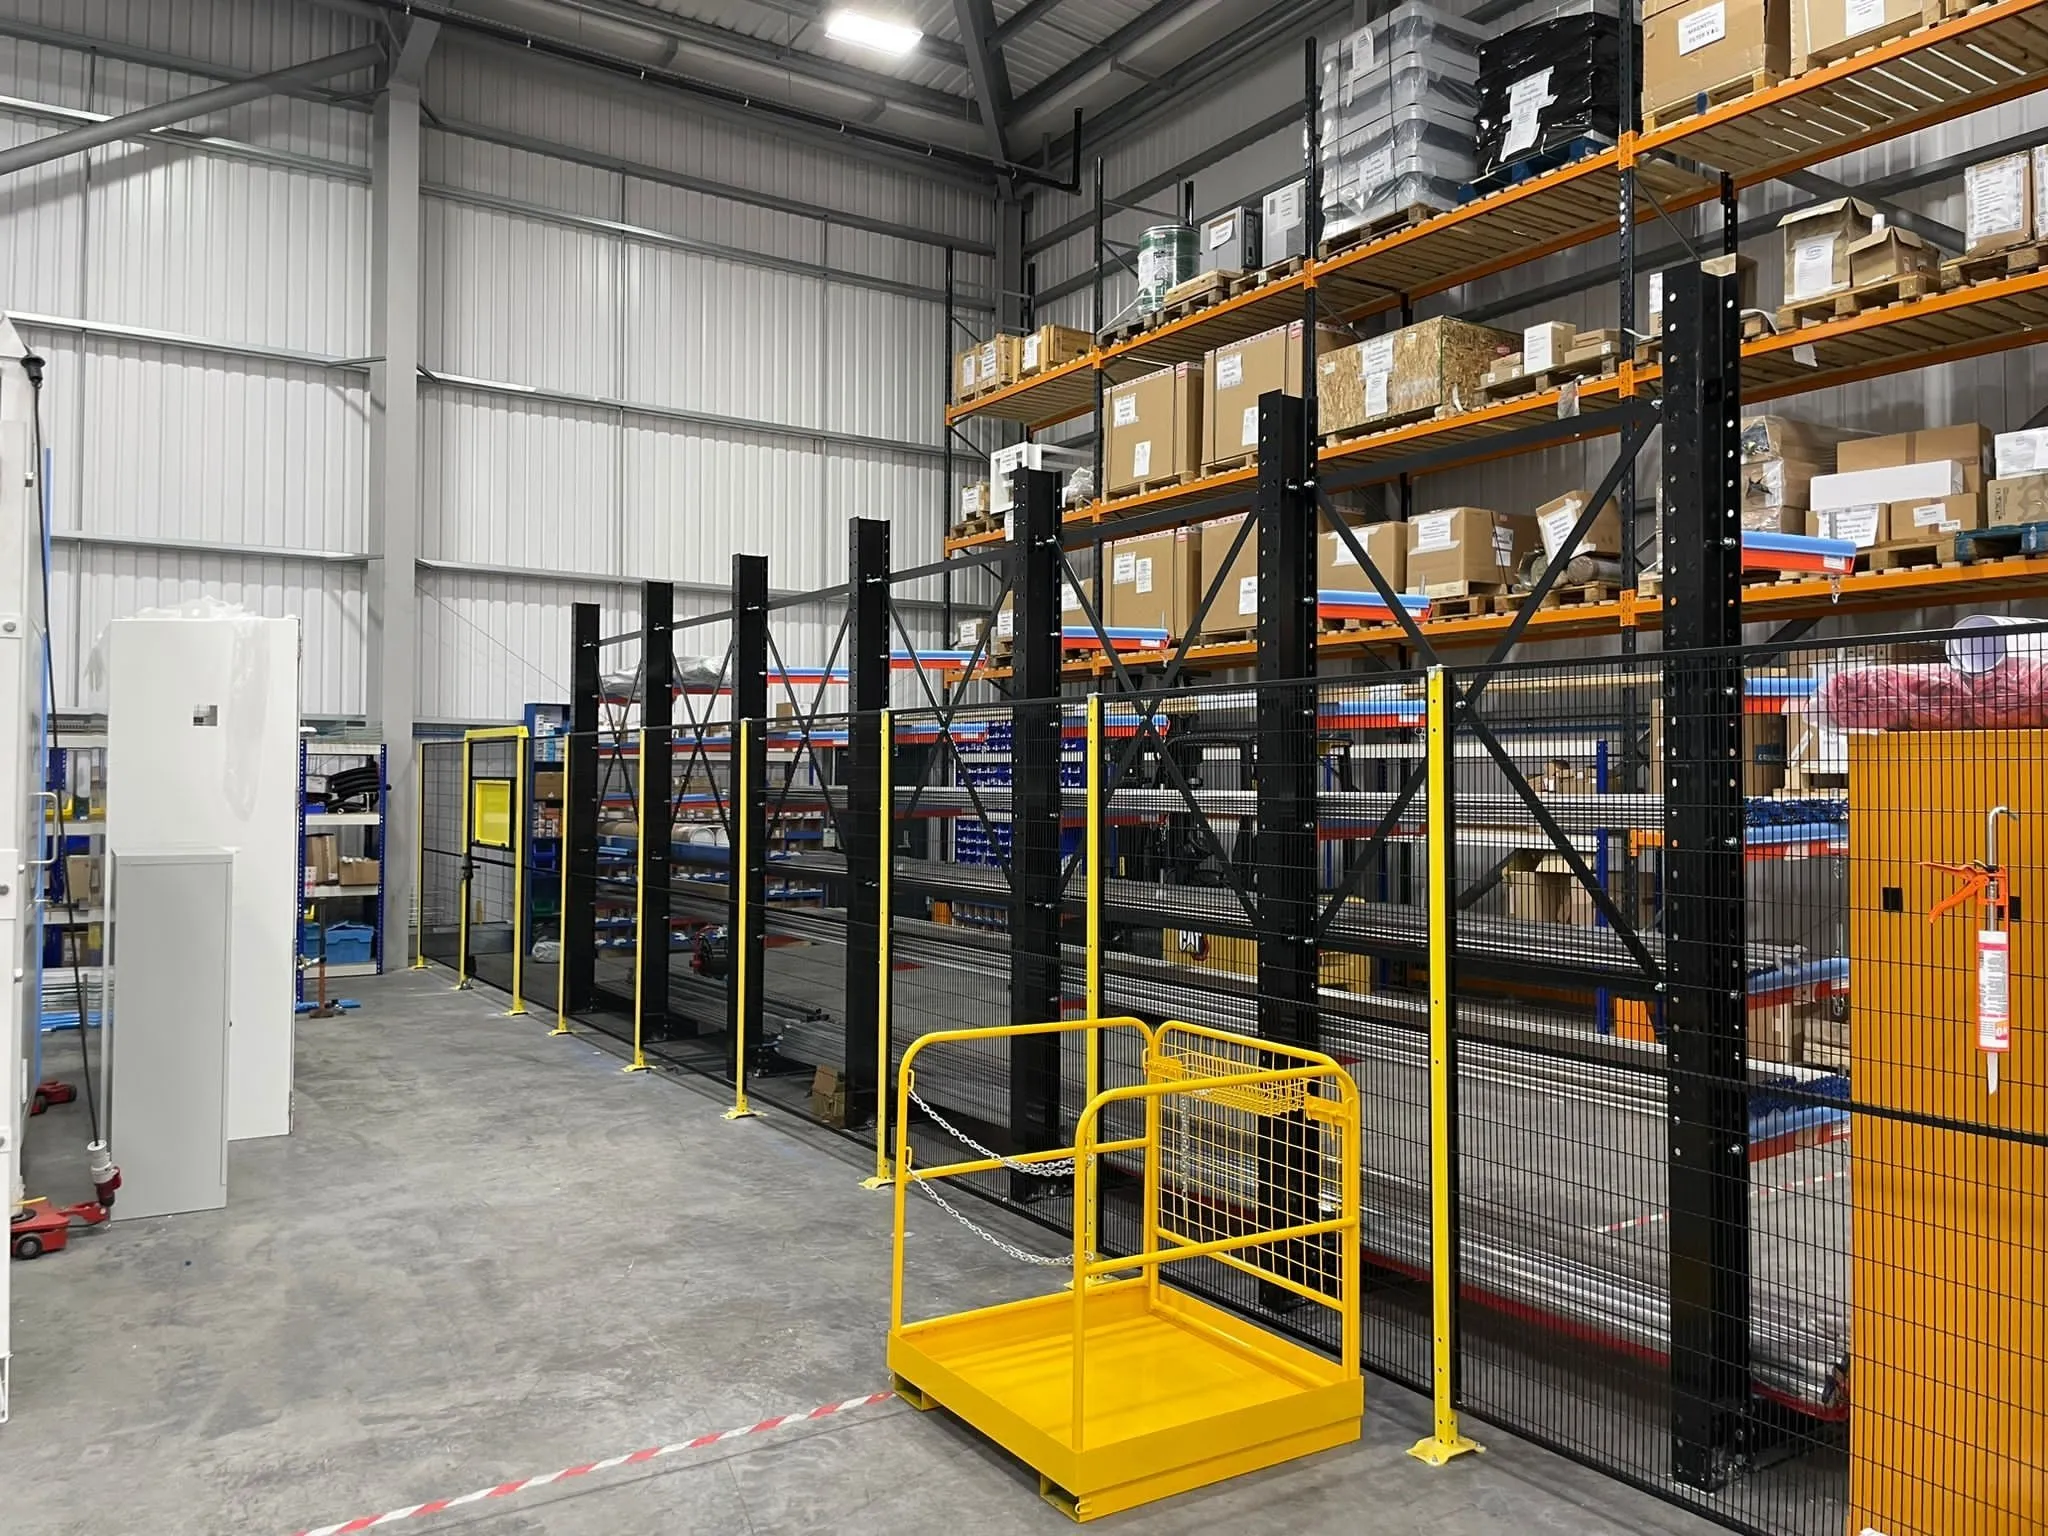 Suppliers of Mezzanine Safety Fencing